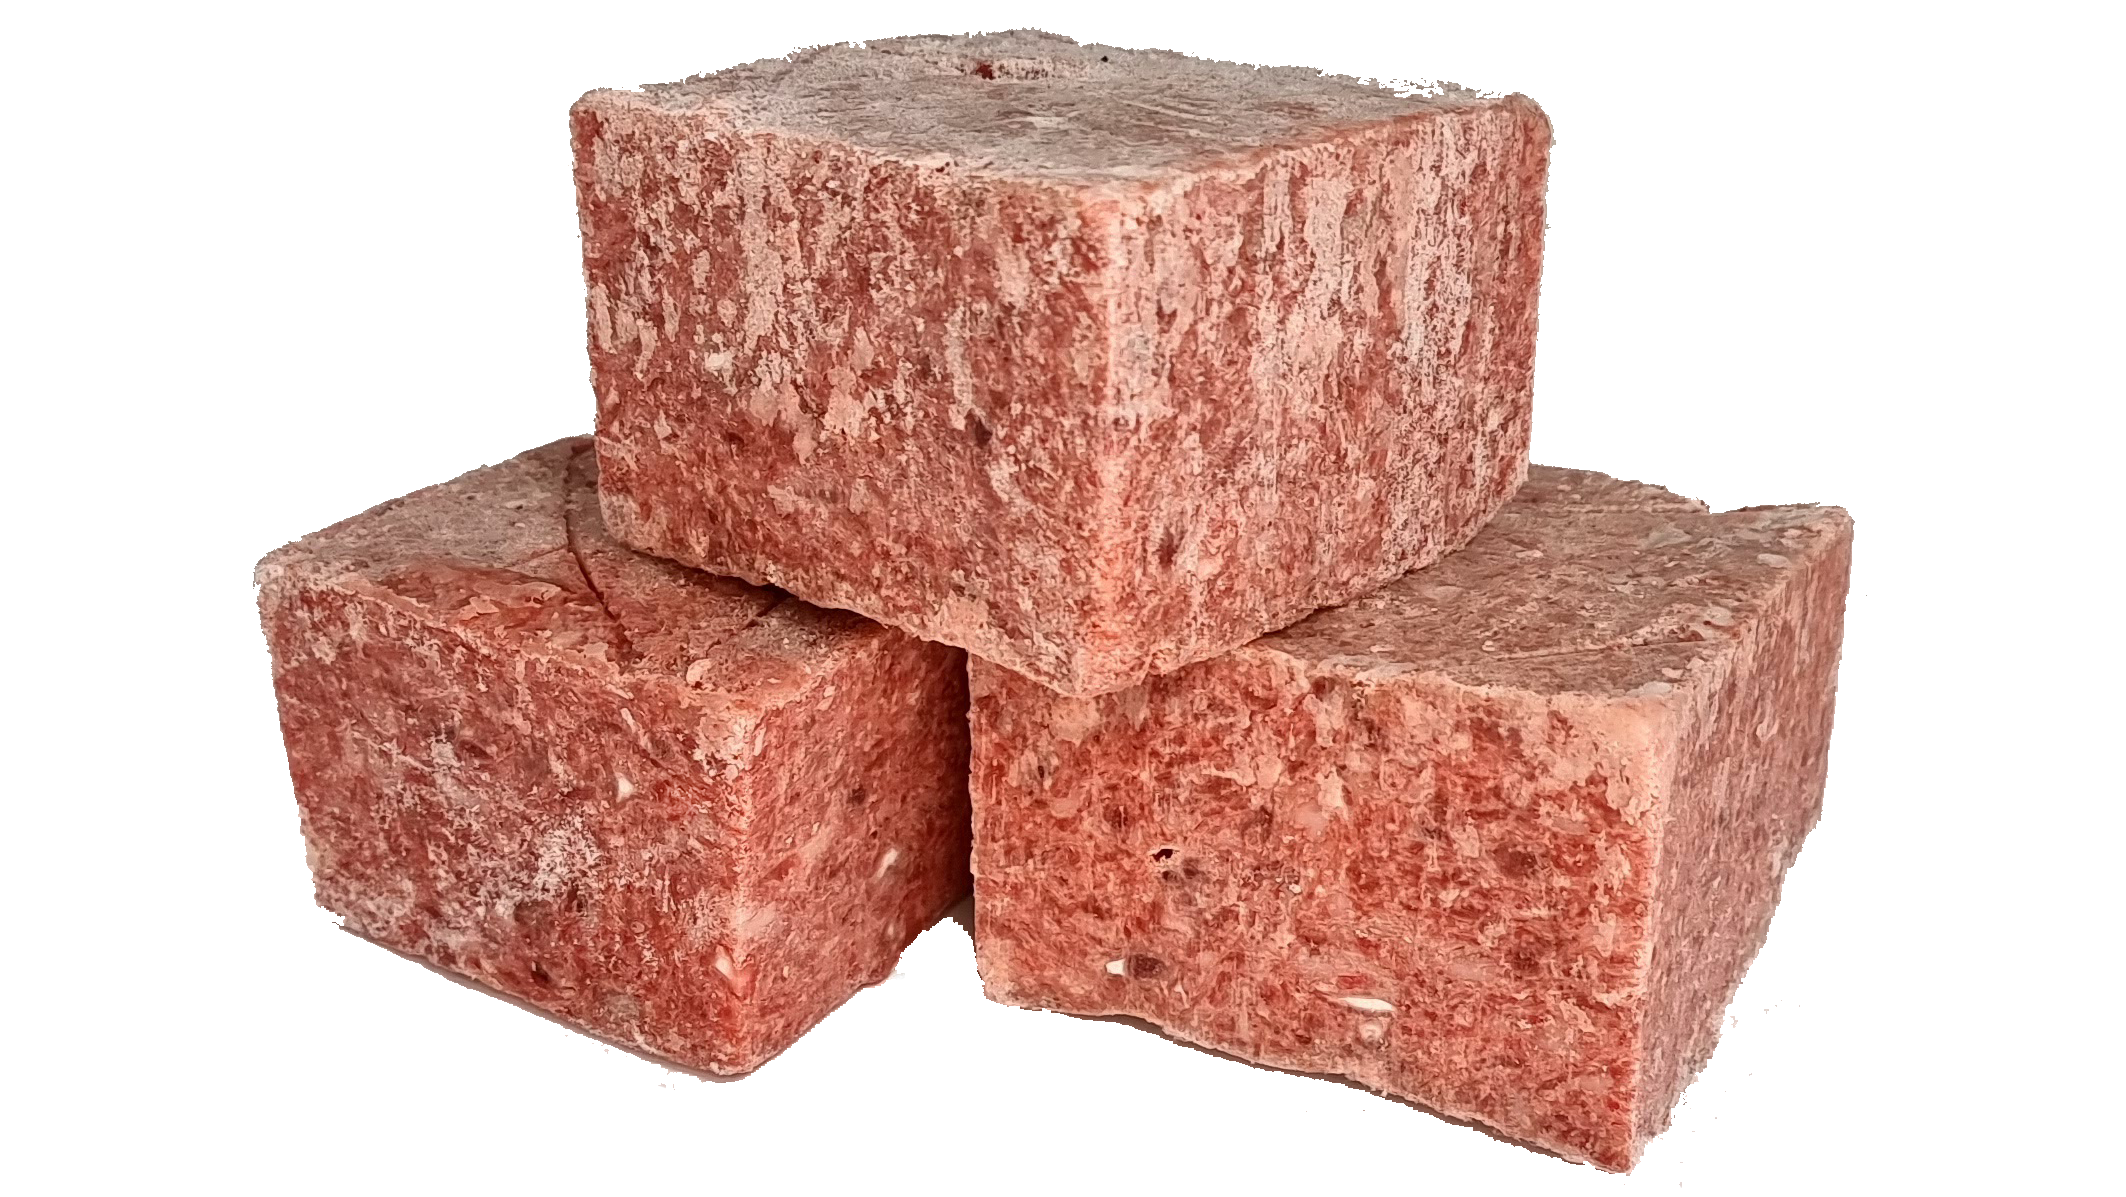 Minced Chicken with Bone 5kgs (11lb) 10 x approx 500g blocks for working dogs